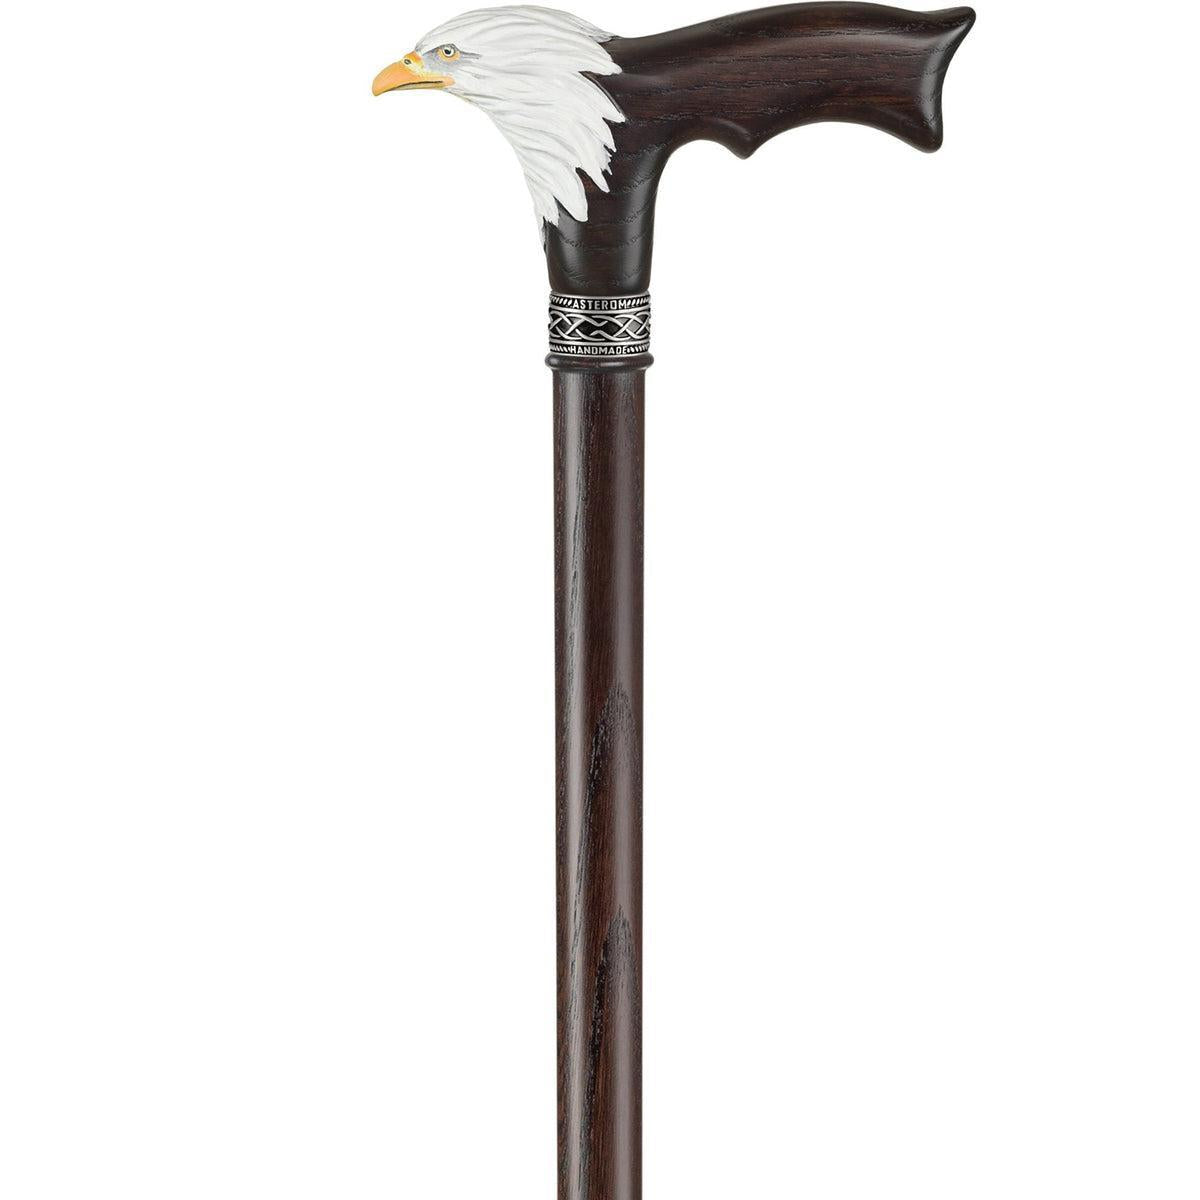 Hand Carved and Painted Wooden Bald Eagle Cane Or Walking Stick